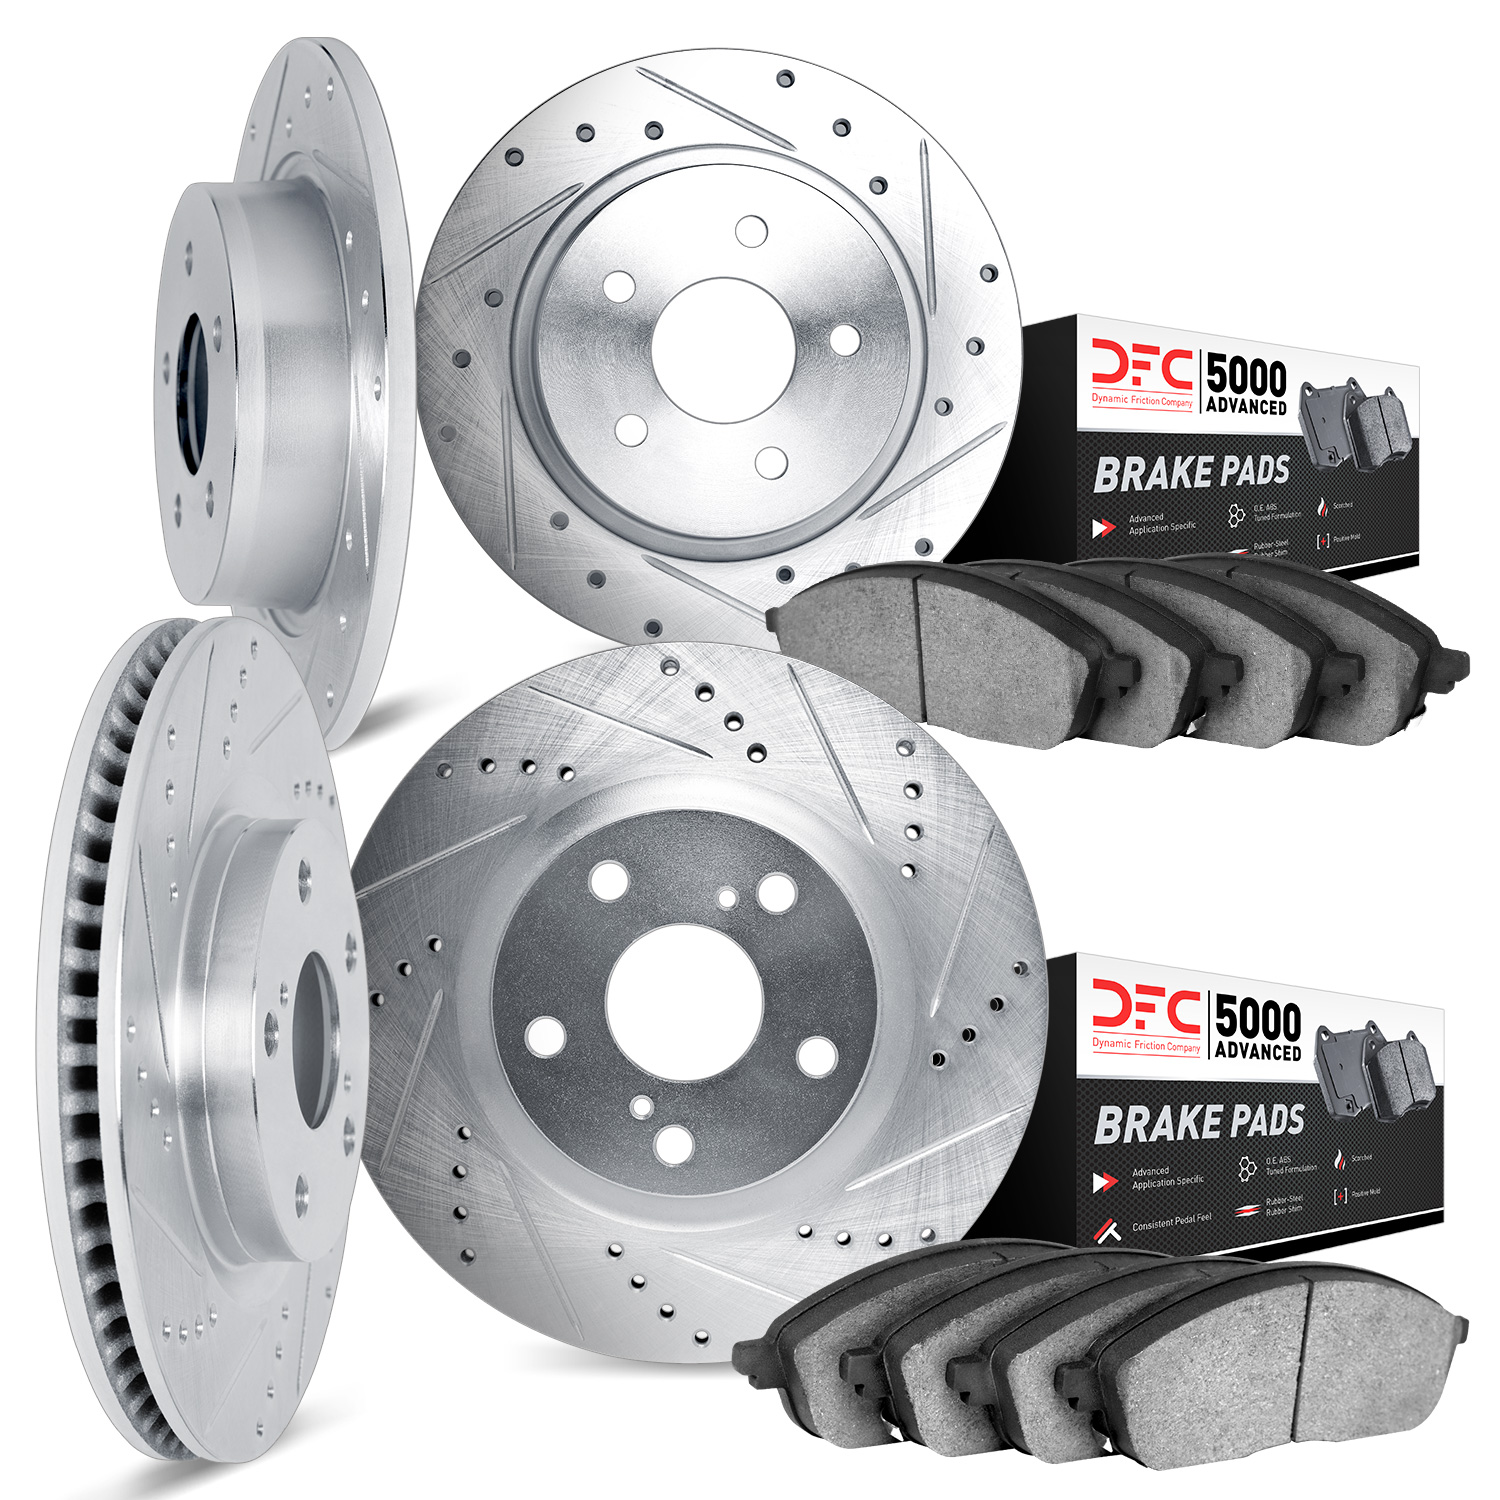 7504-76159 Drilled/Slotted Brake Rotors w/5000 Advanced Brake Pads Kit [Silver], 2004-2009 Lexus/Toyota/Scion, Position: Front a